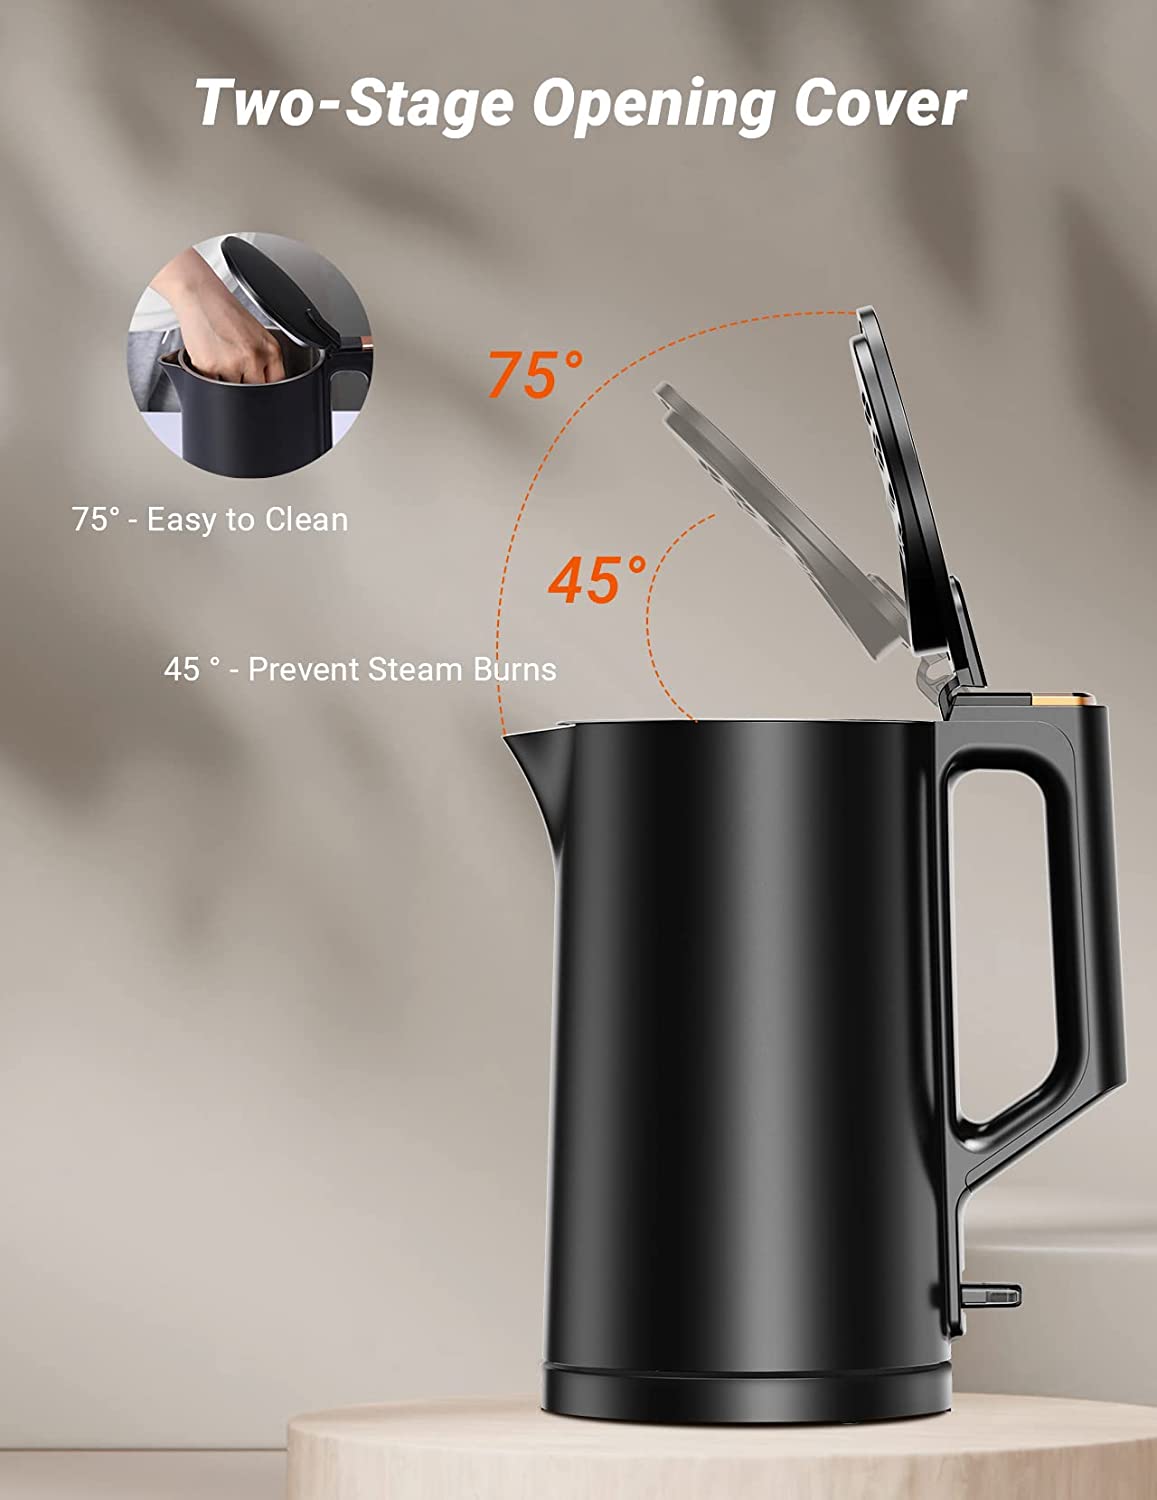 Offacy Electric Kettle Review - Fast Heating & Sleek Design 